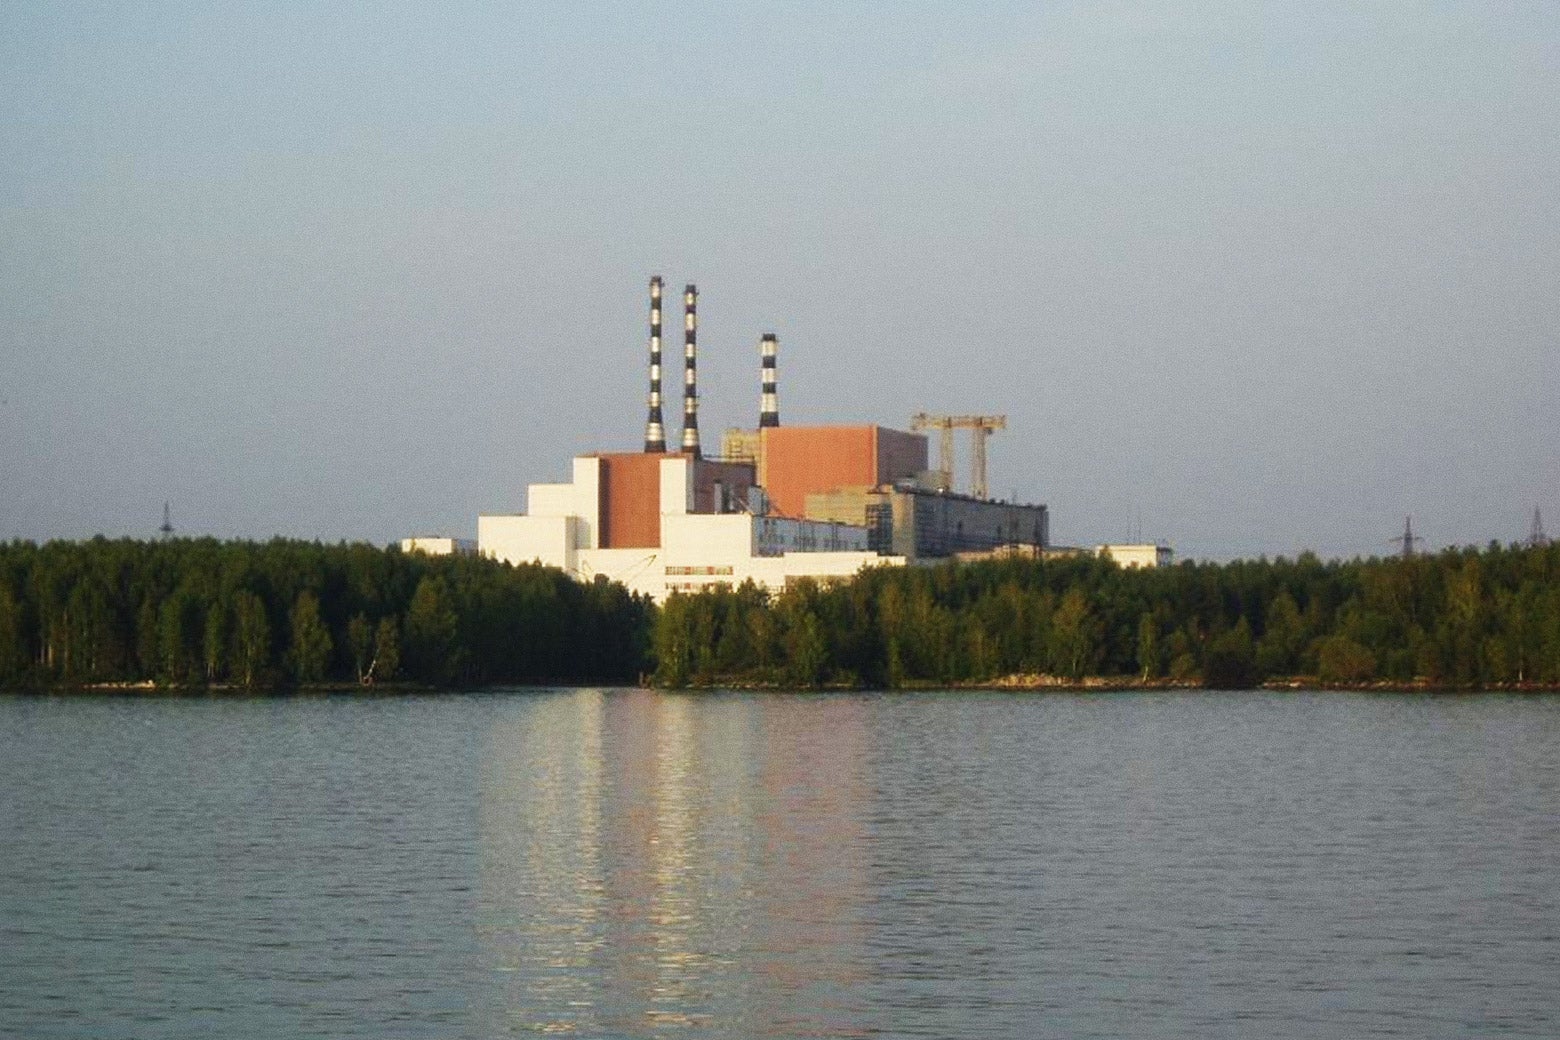 Main building of the Beloyarsk Nuclear Power Station.